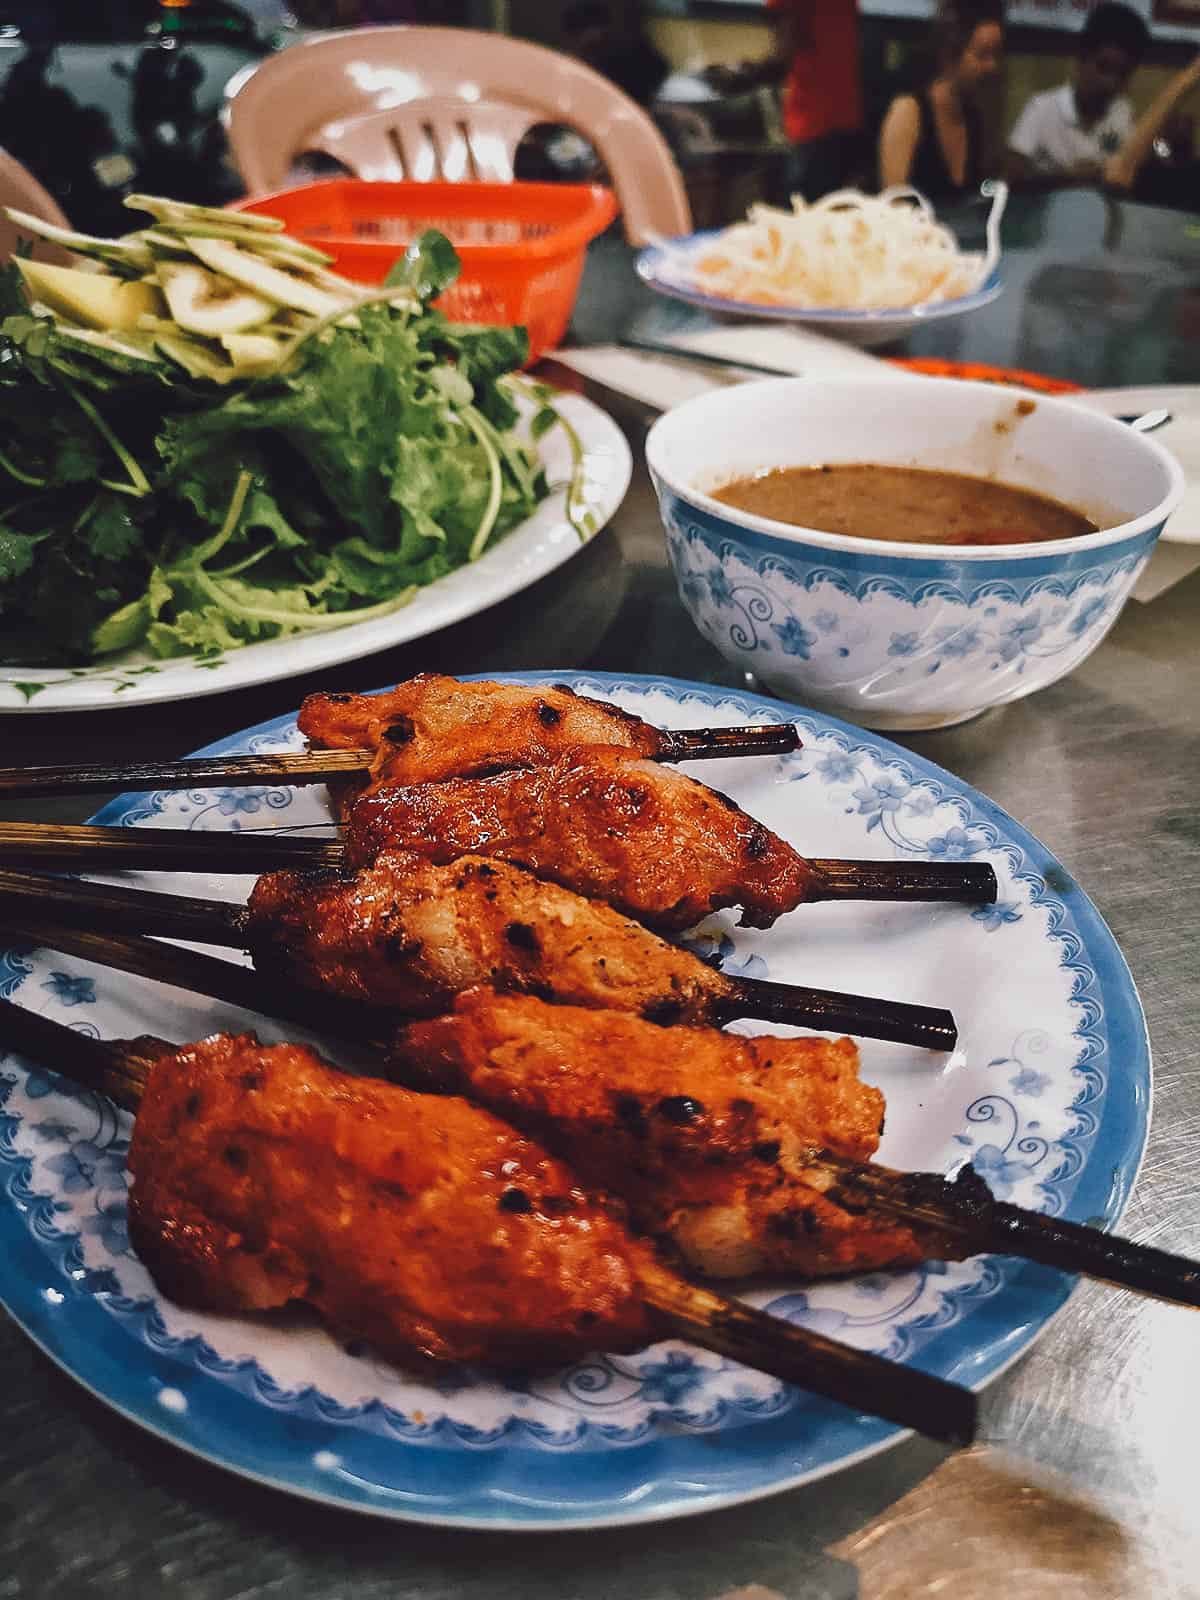 Nem lui, a tasty Vietnamese dish made with skewered grilled fatty pork and peanut sauce